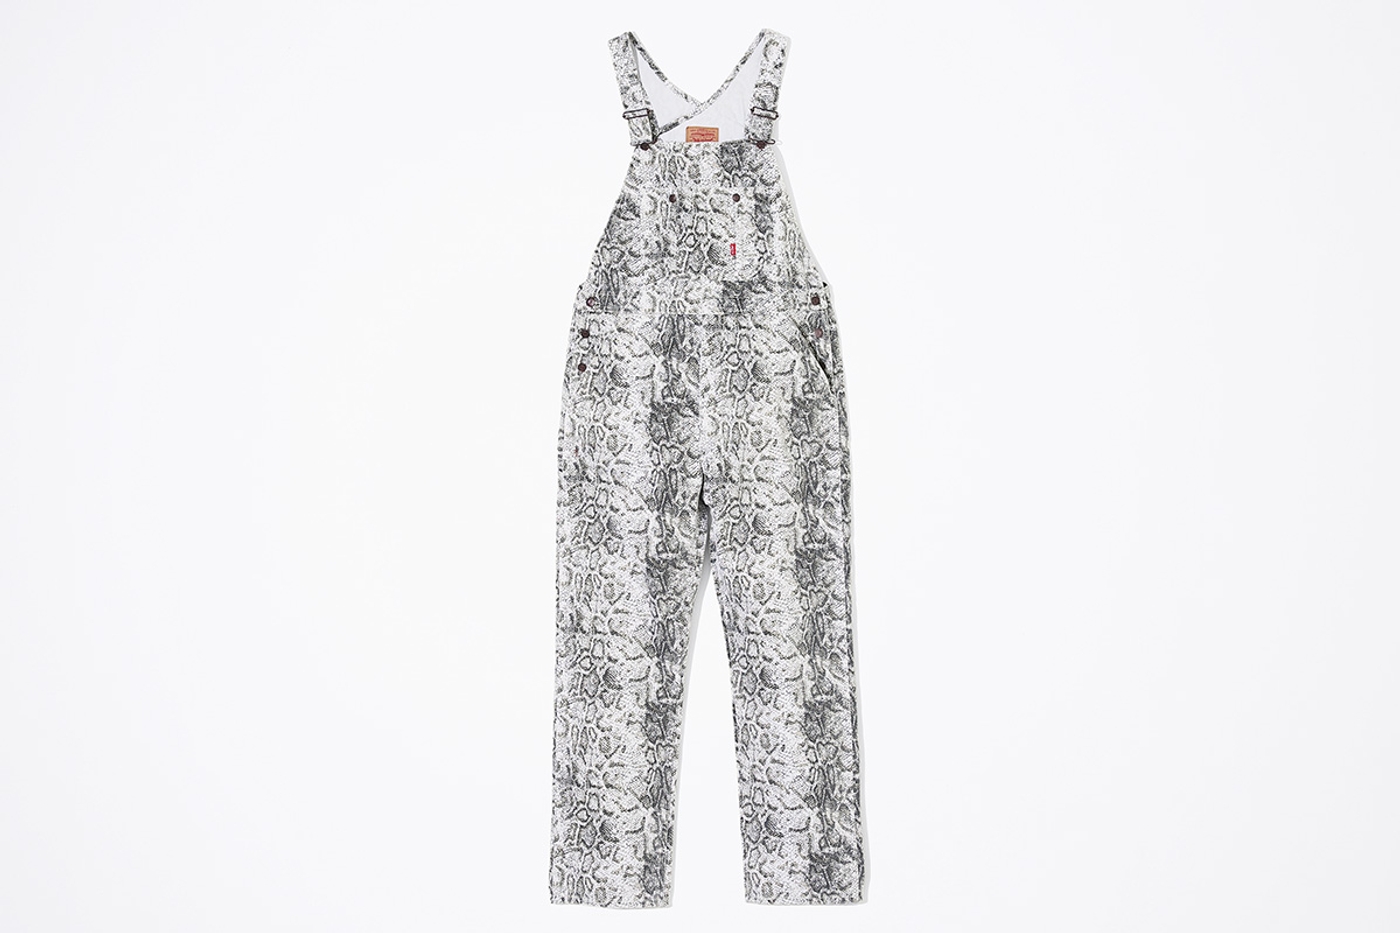 Overalls with cotton flannel lining. (3/16)